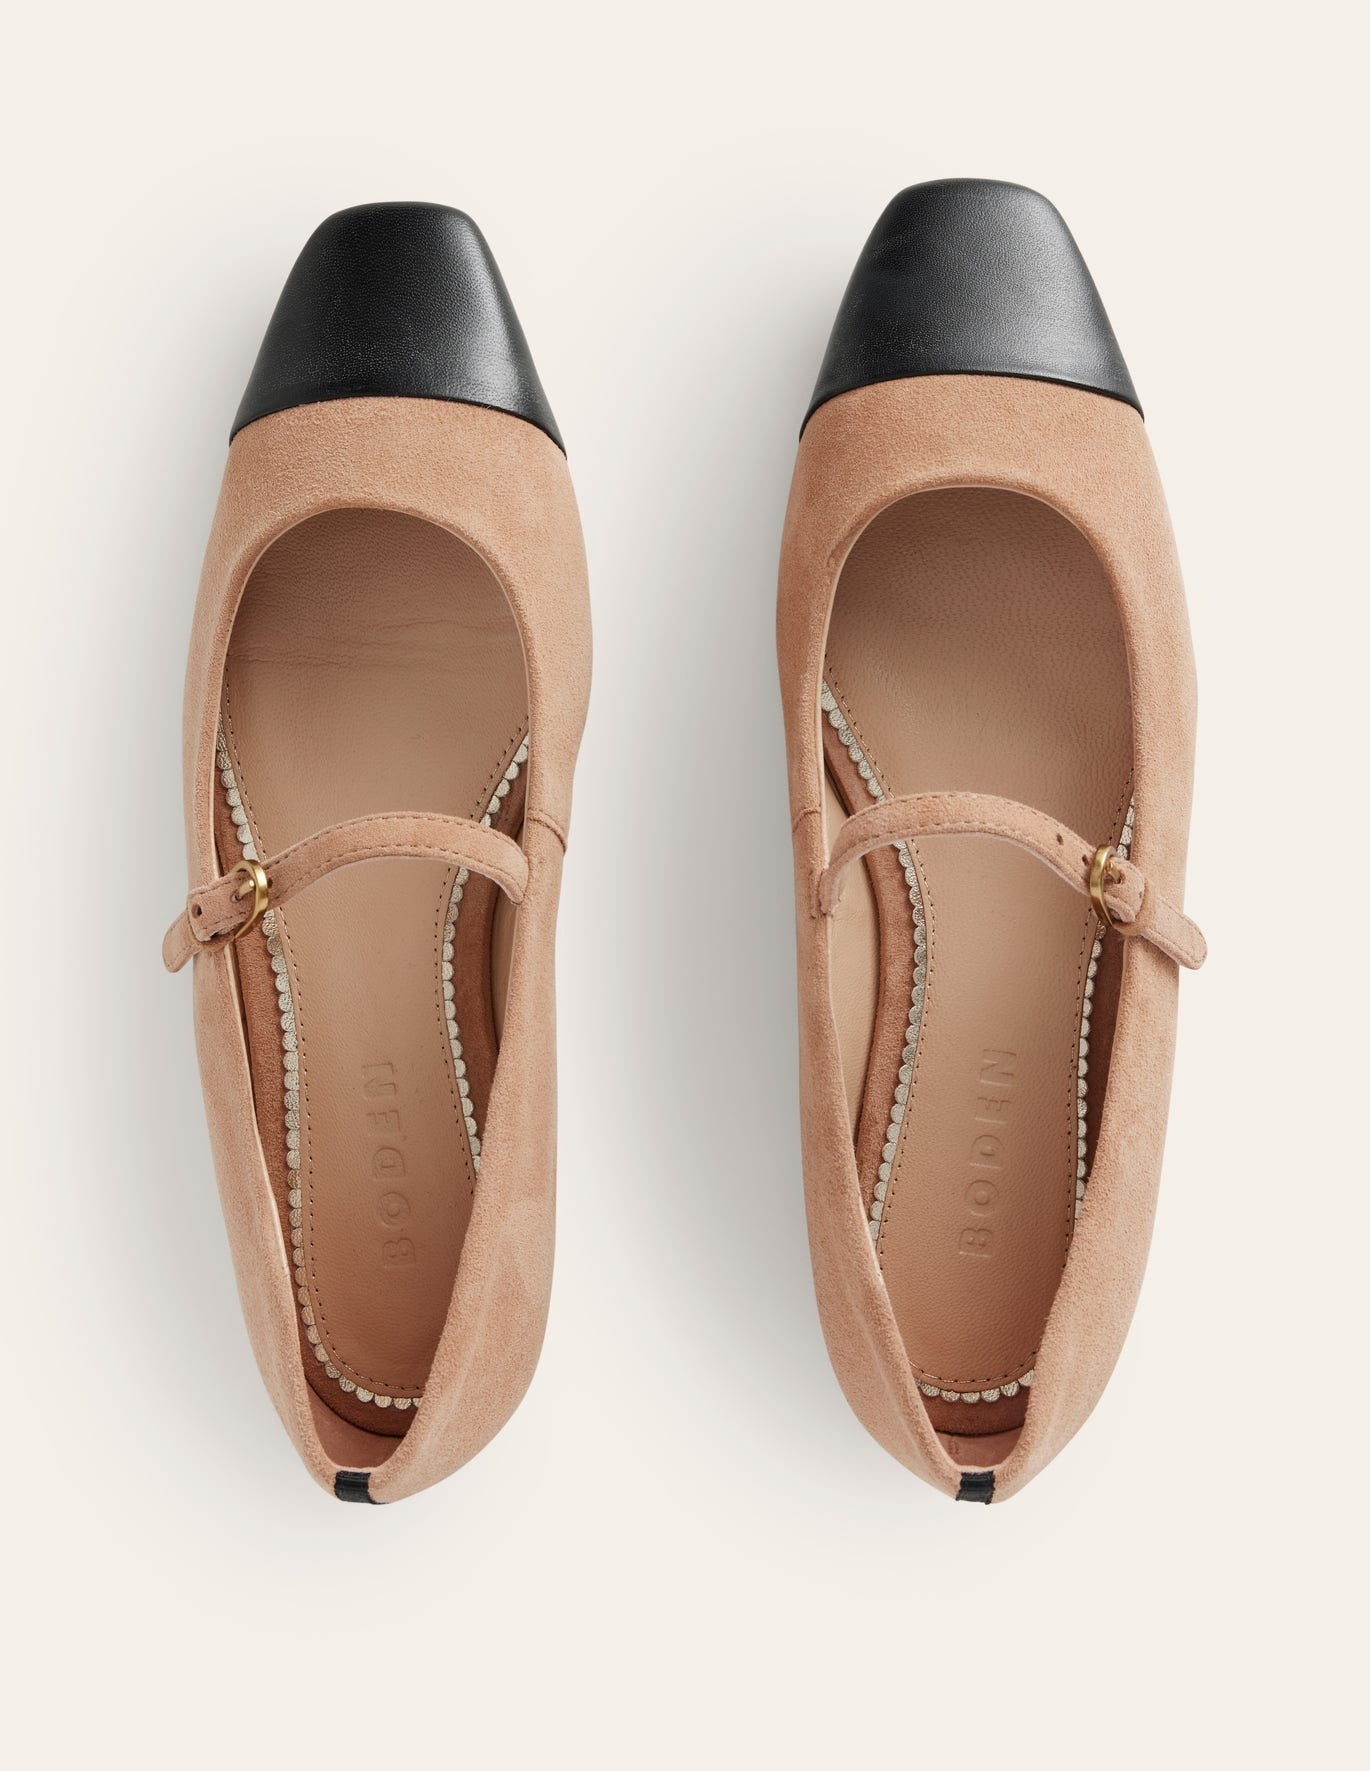 Mary Jane suede flats